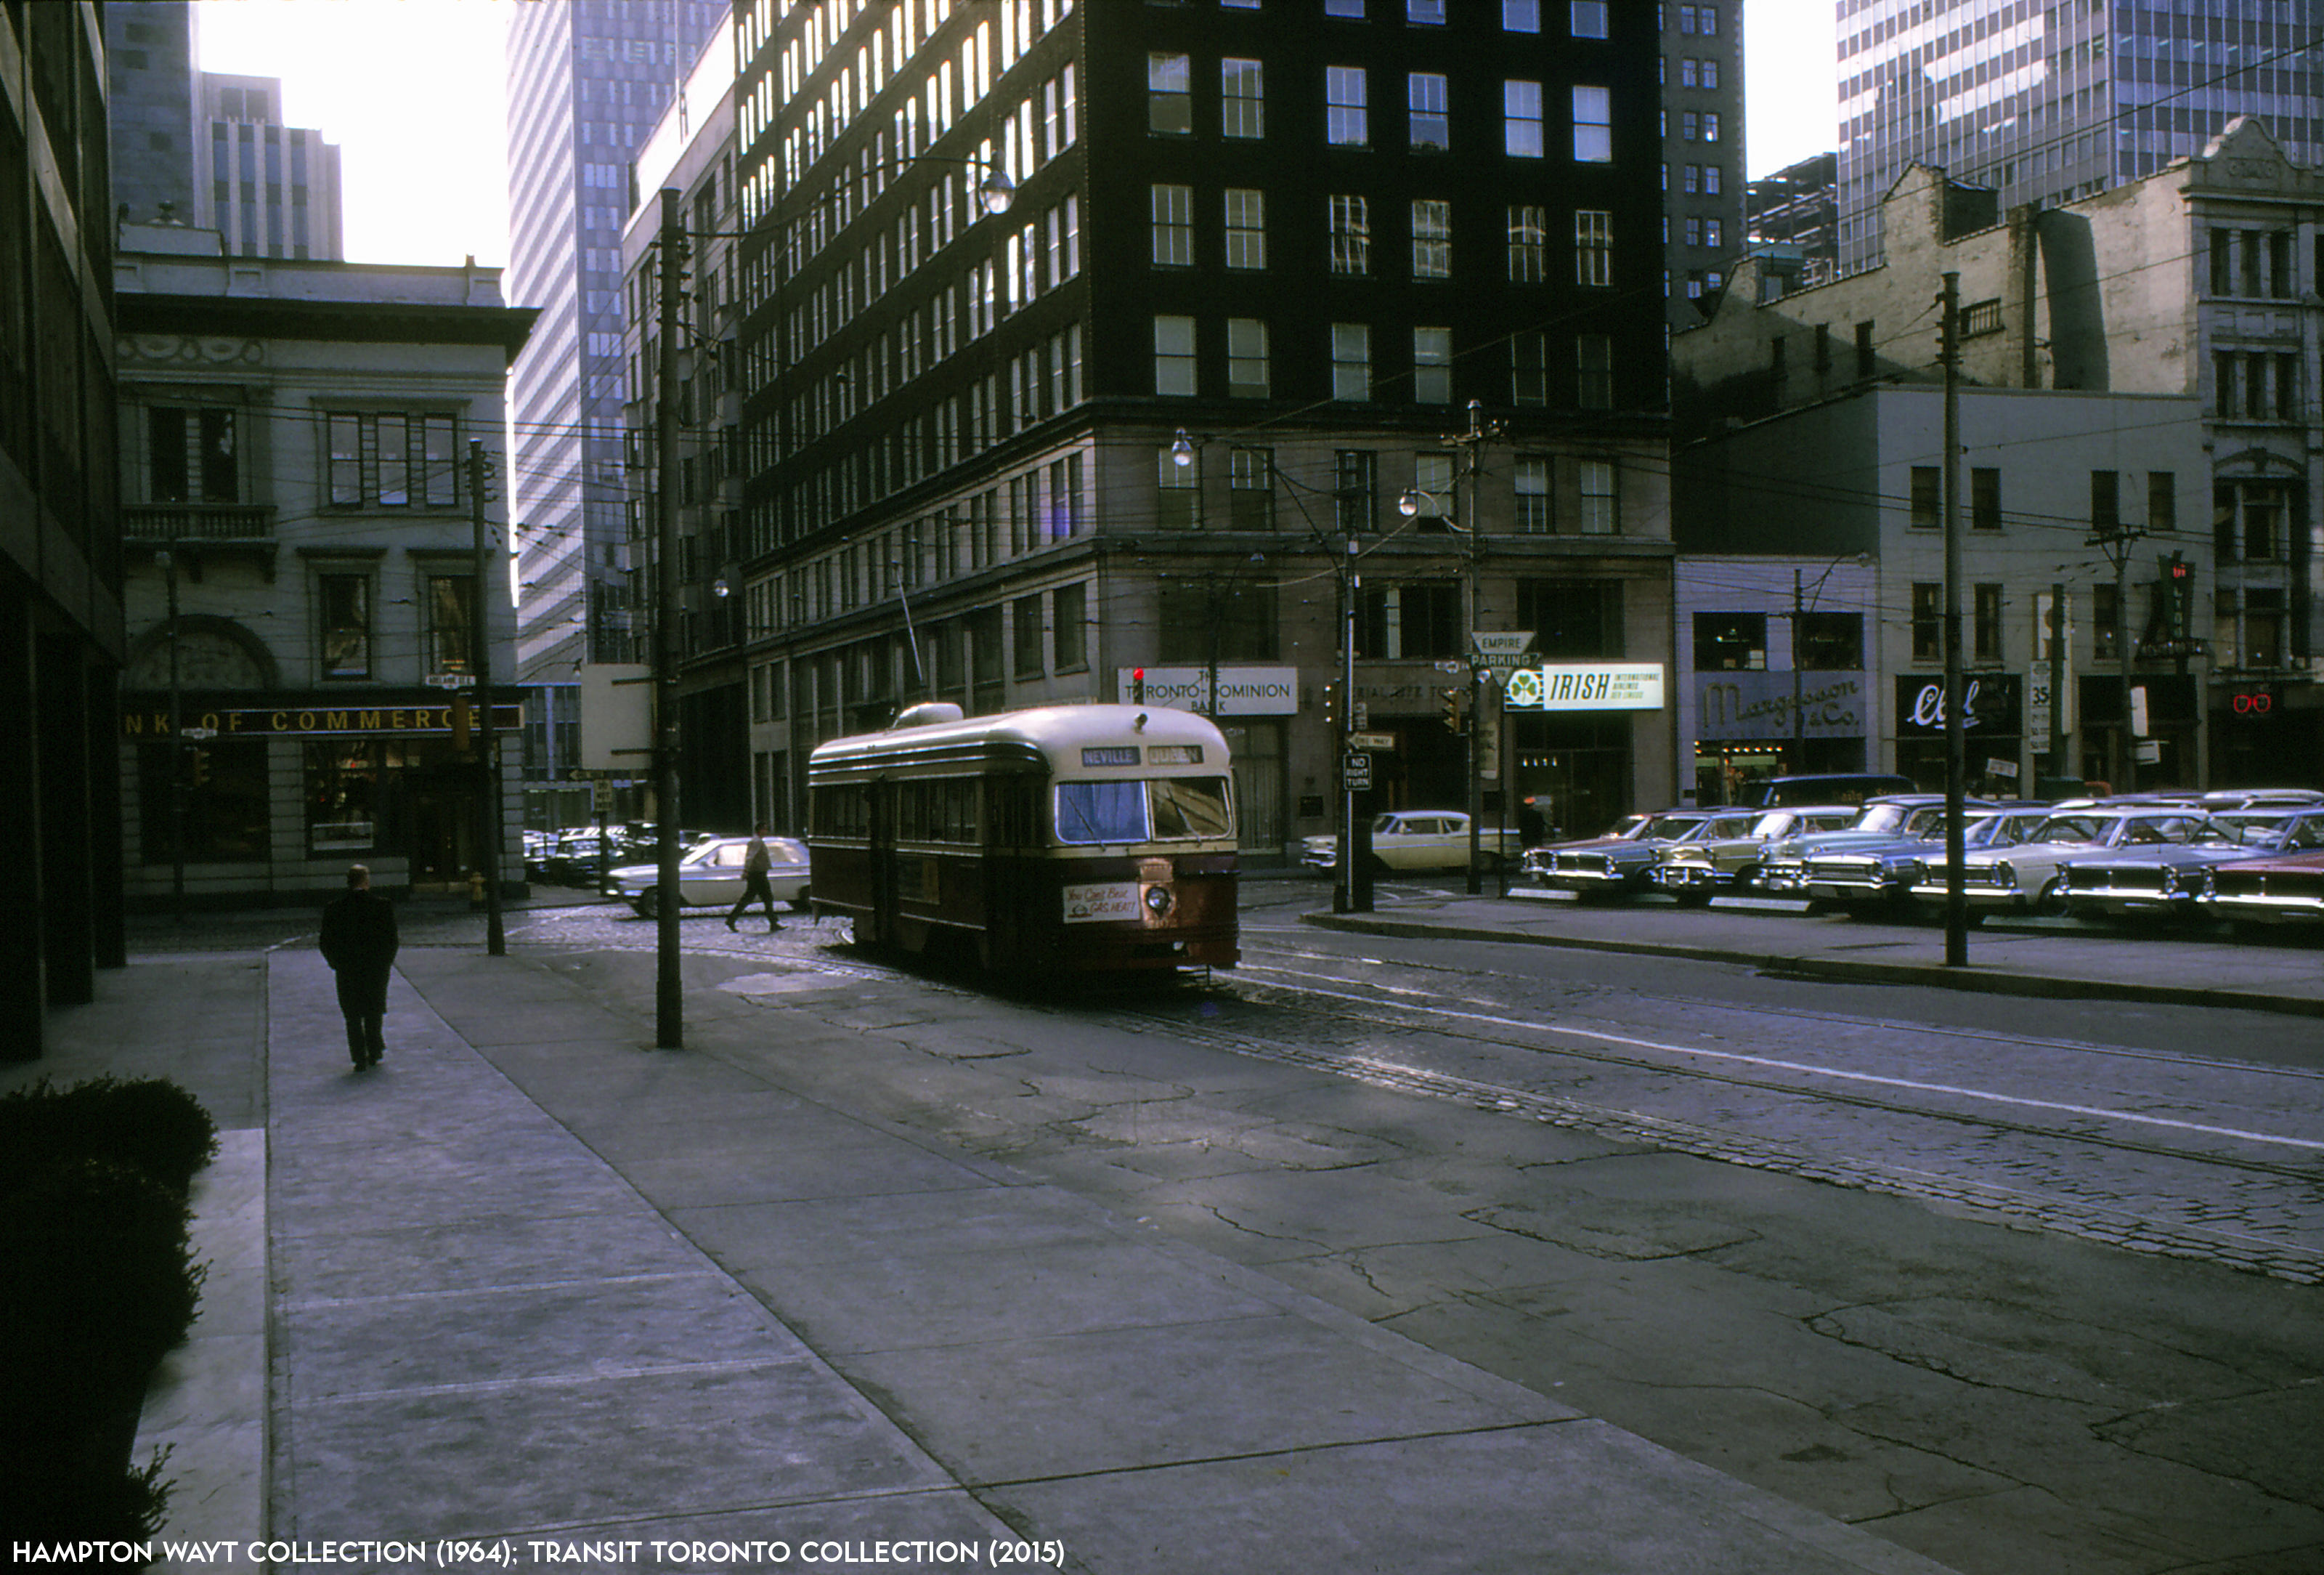 19641114 - 501 Queen - 4102 EB Adelaide to NB Victoria